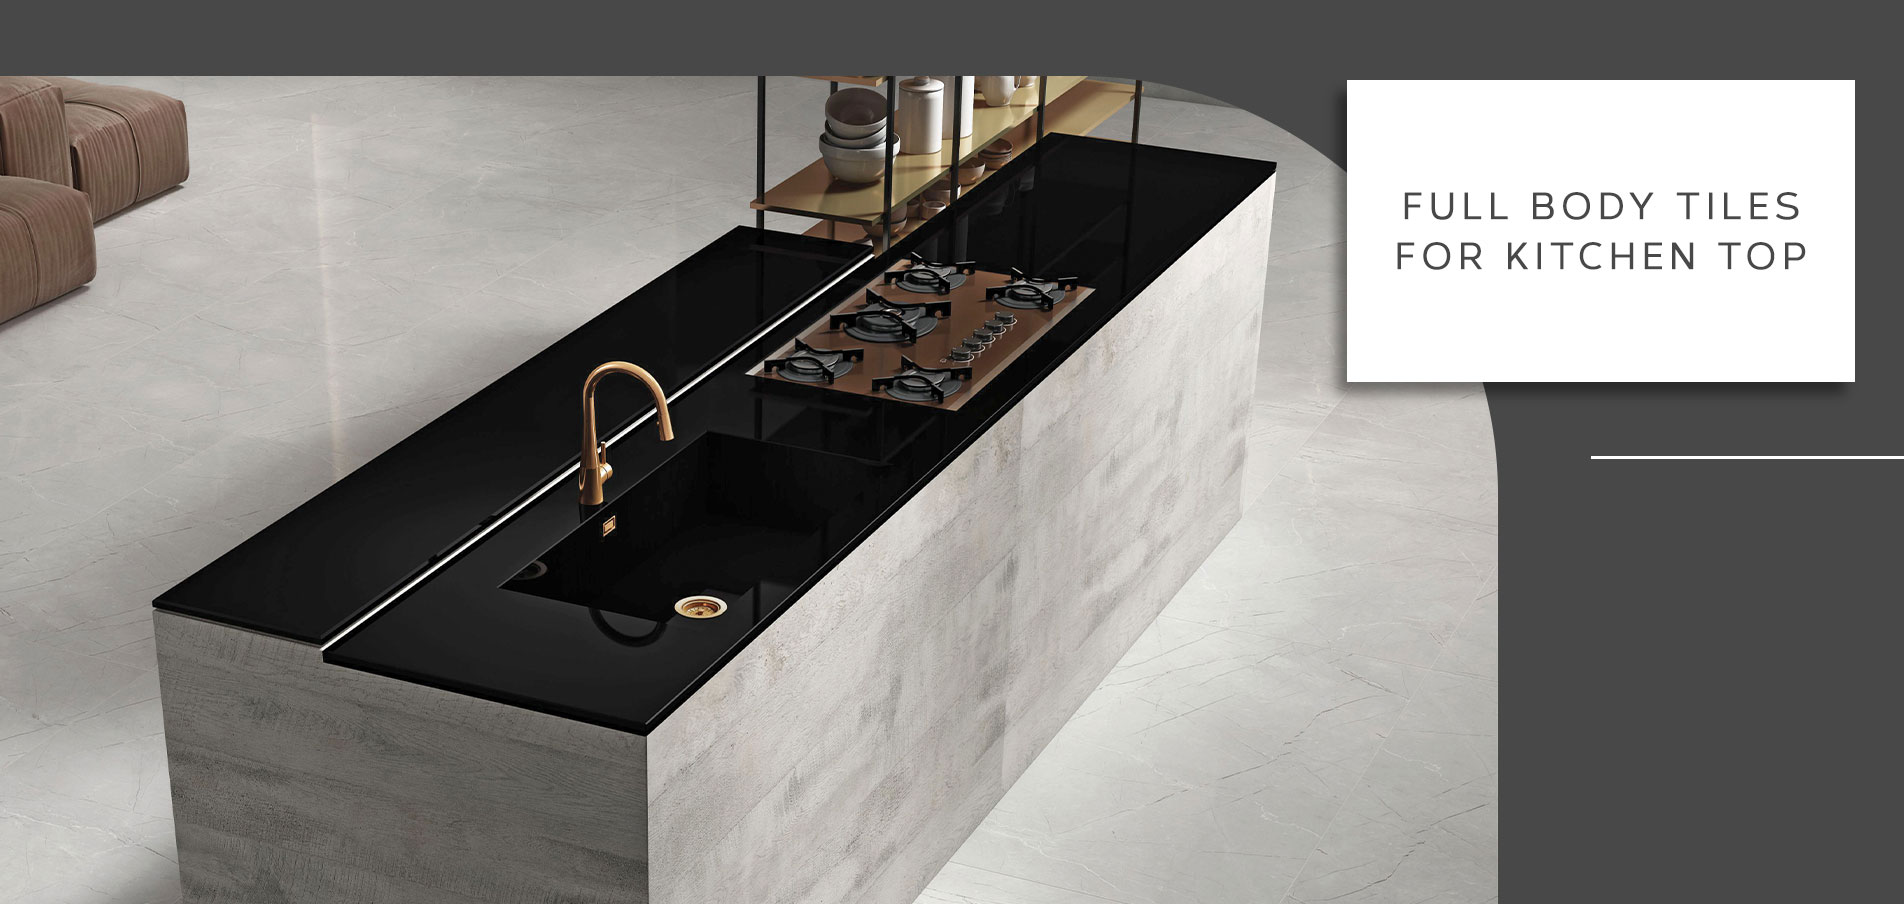 Discover Full Body Tiles for Kitchen Countertops by Simpolo